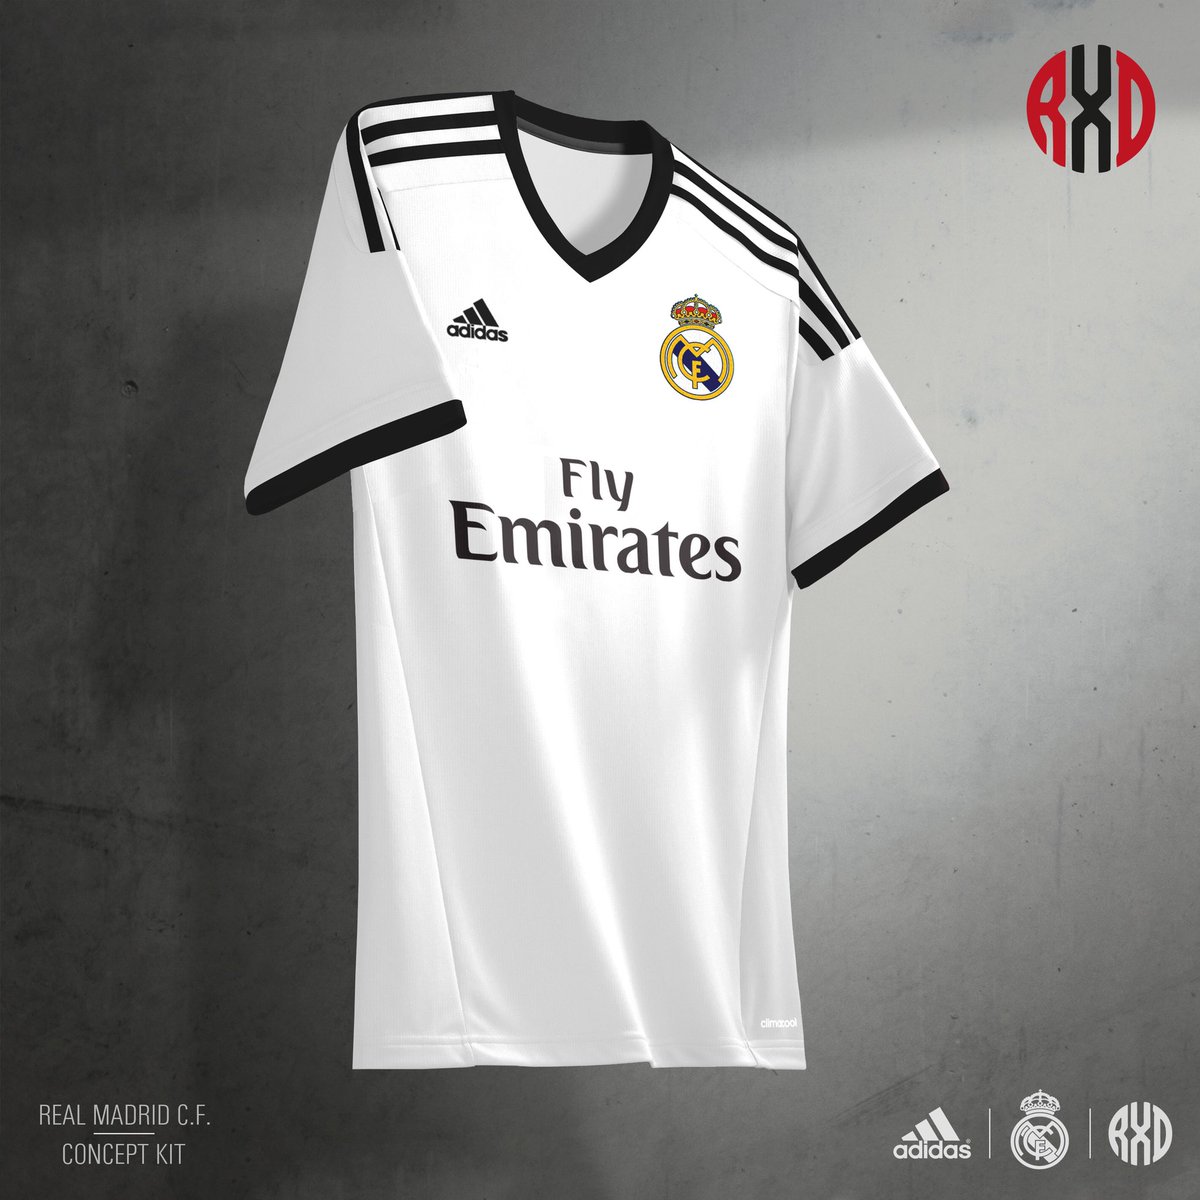 Download RevXports® Design on Twitter: "Real Madrid 18-19 | Concept ...